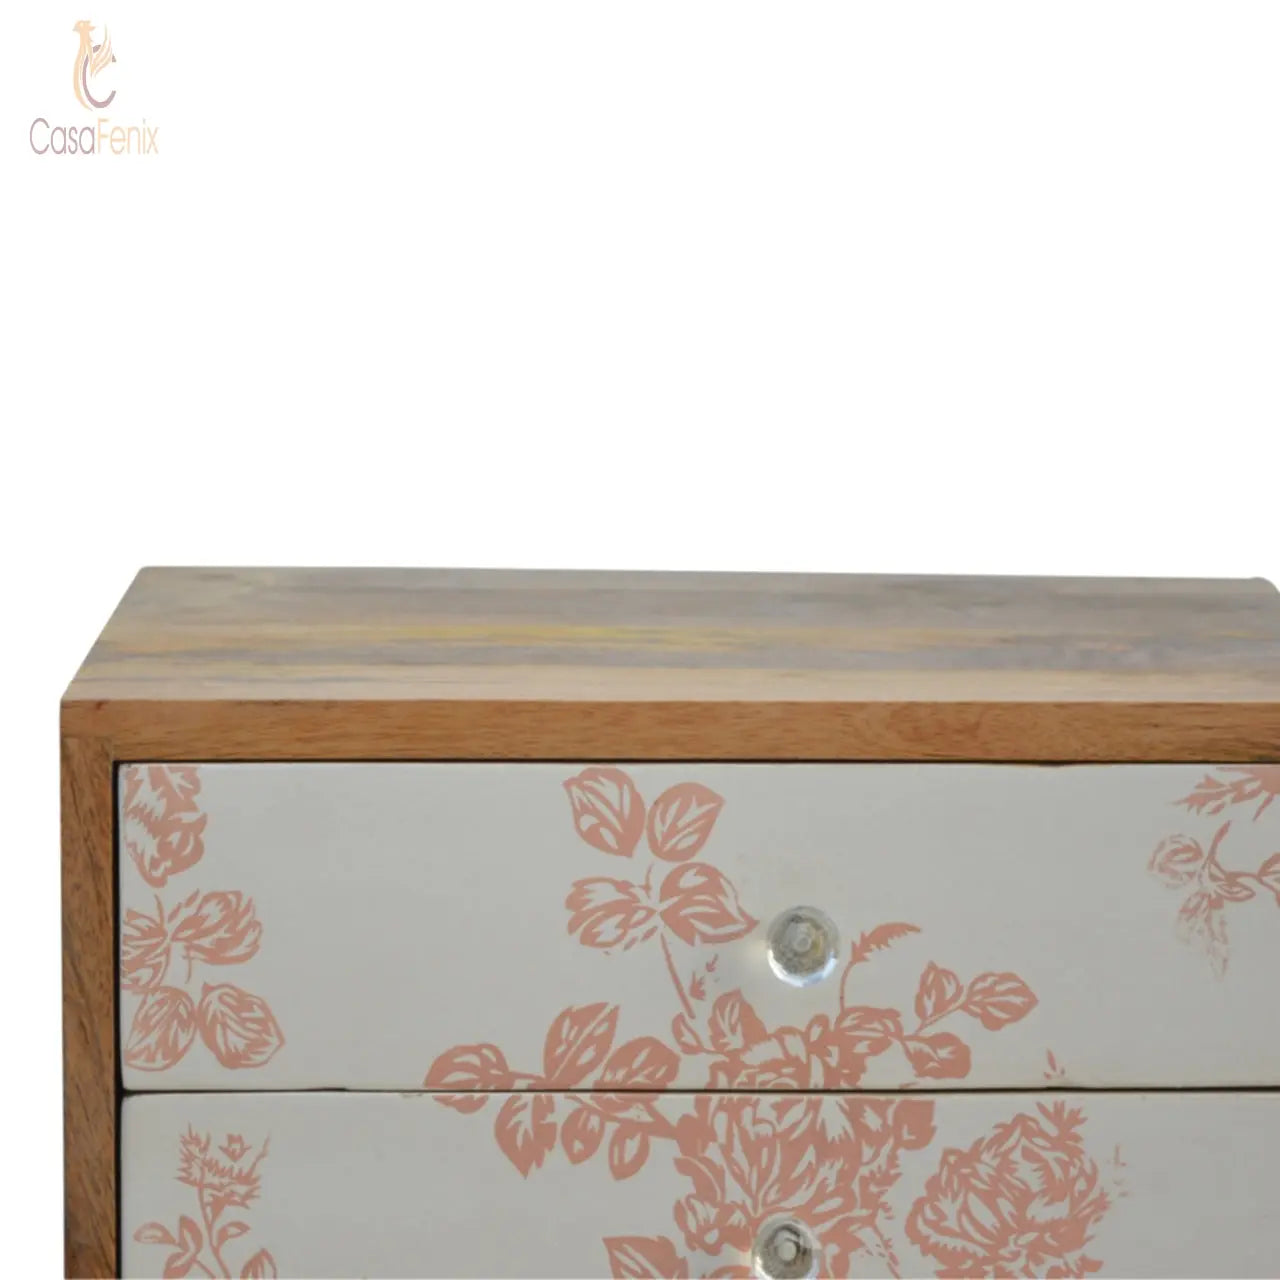 Pink Floral Screen Printed Bedside Table 2 Door Chest - CasaFenix